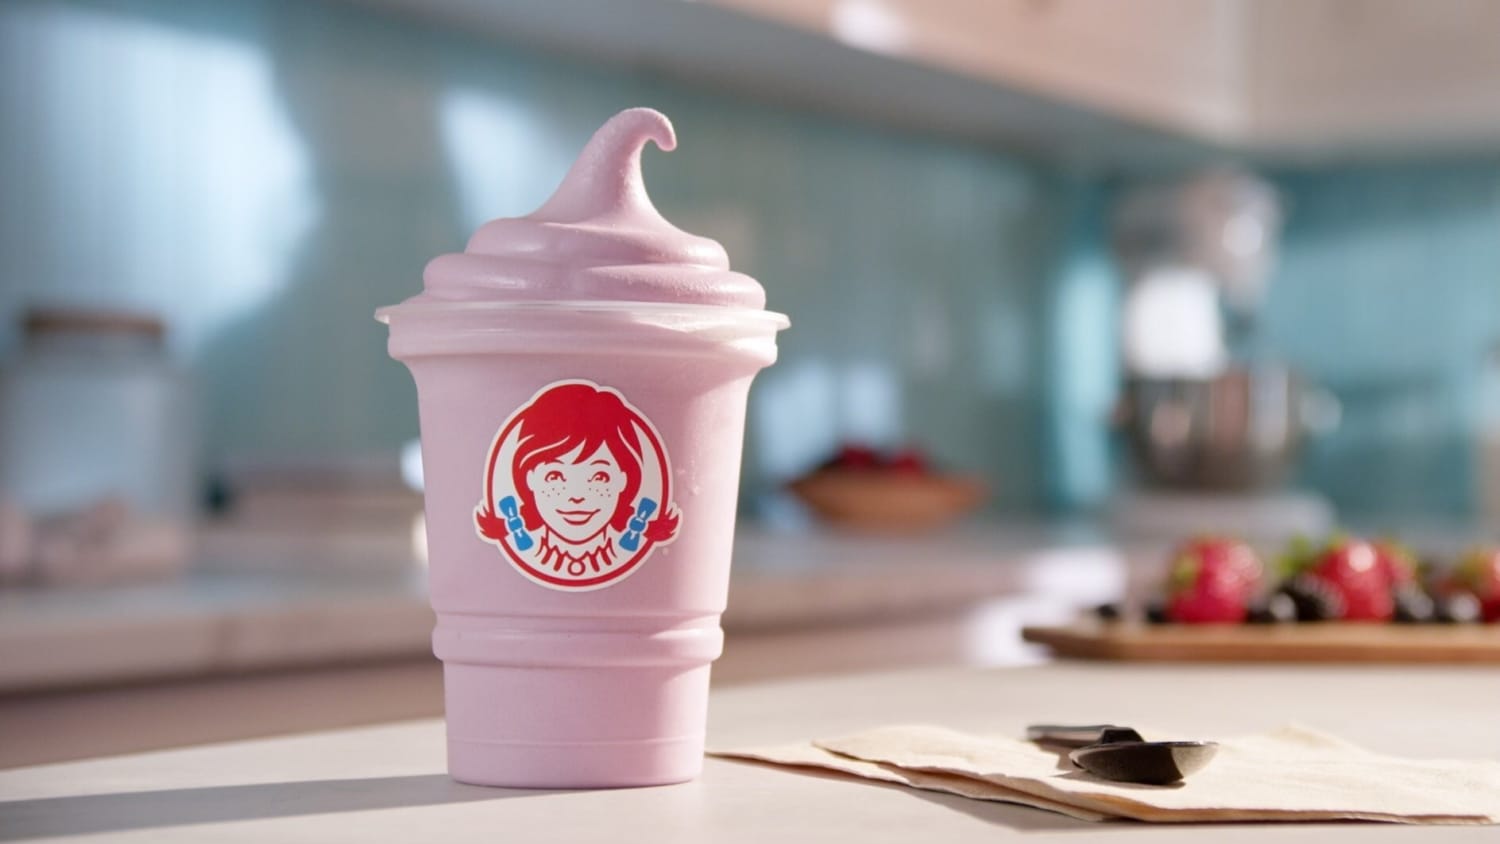 Wendy's dropped a new Frosty flavor and it's dividing customers